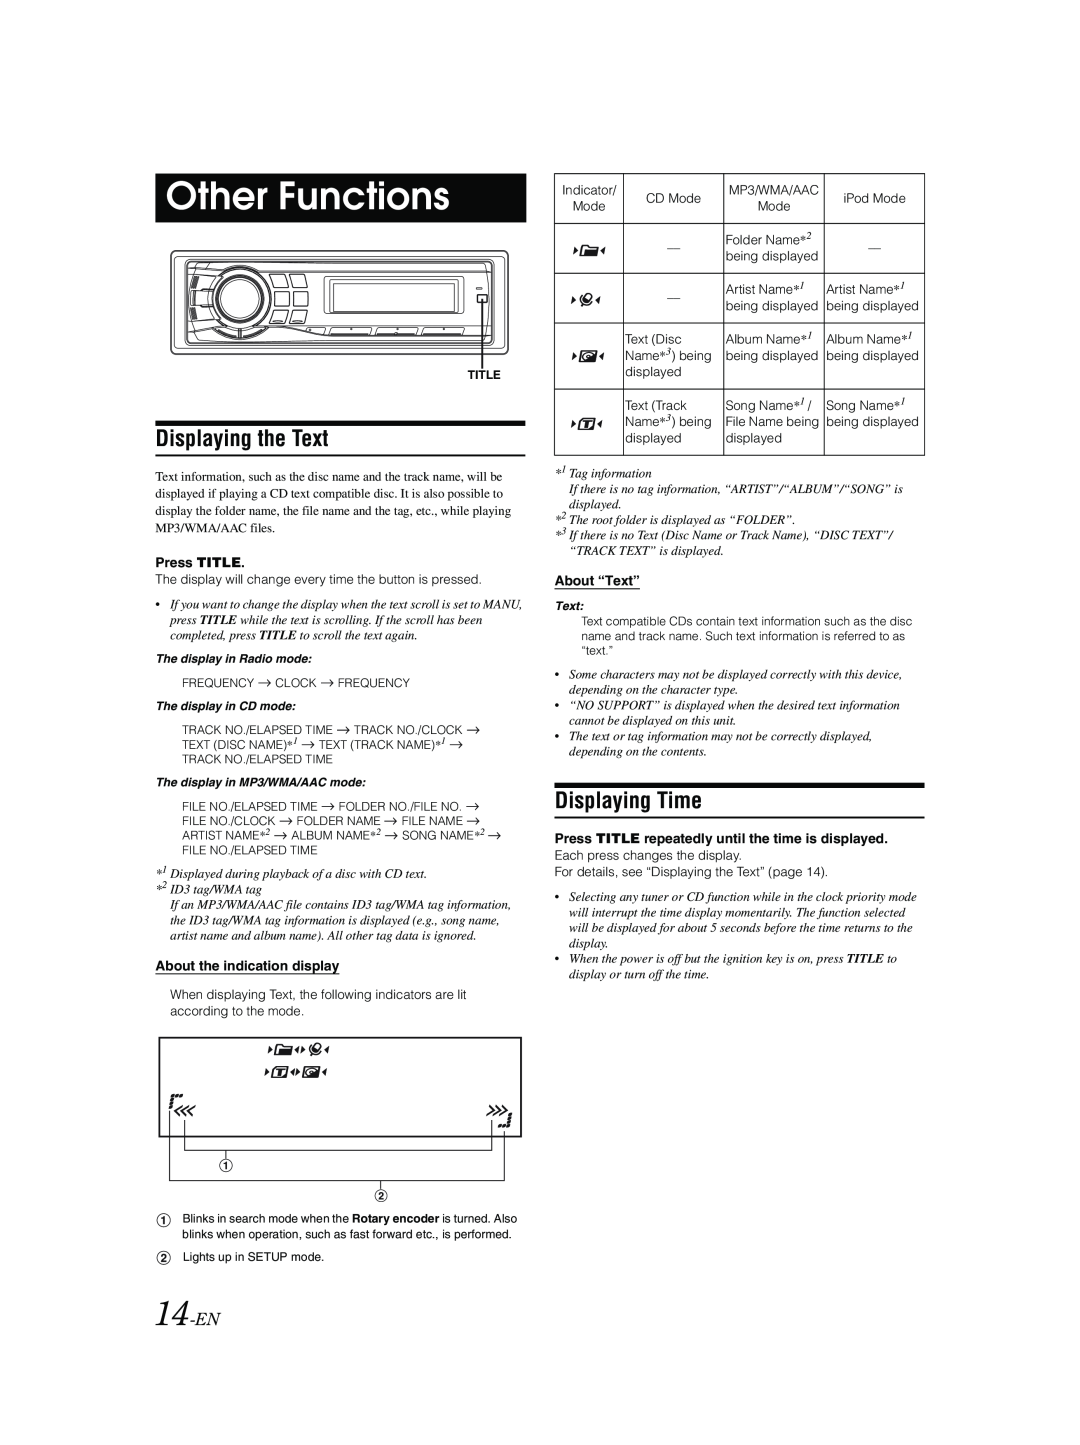 Alpine CDE-9881 owner manual Other Functions, Displaying the Text, Displaying Time, 14-EN 